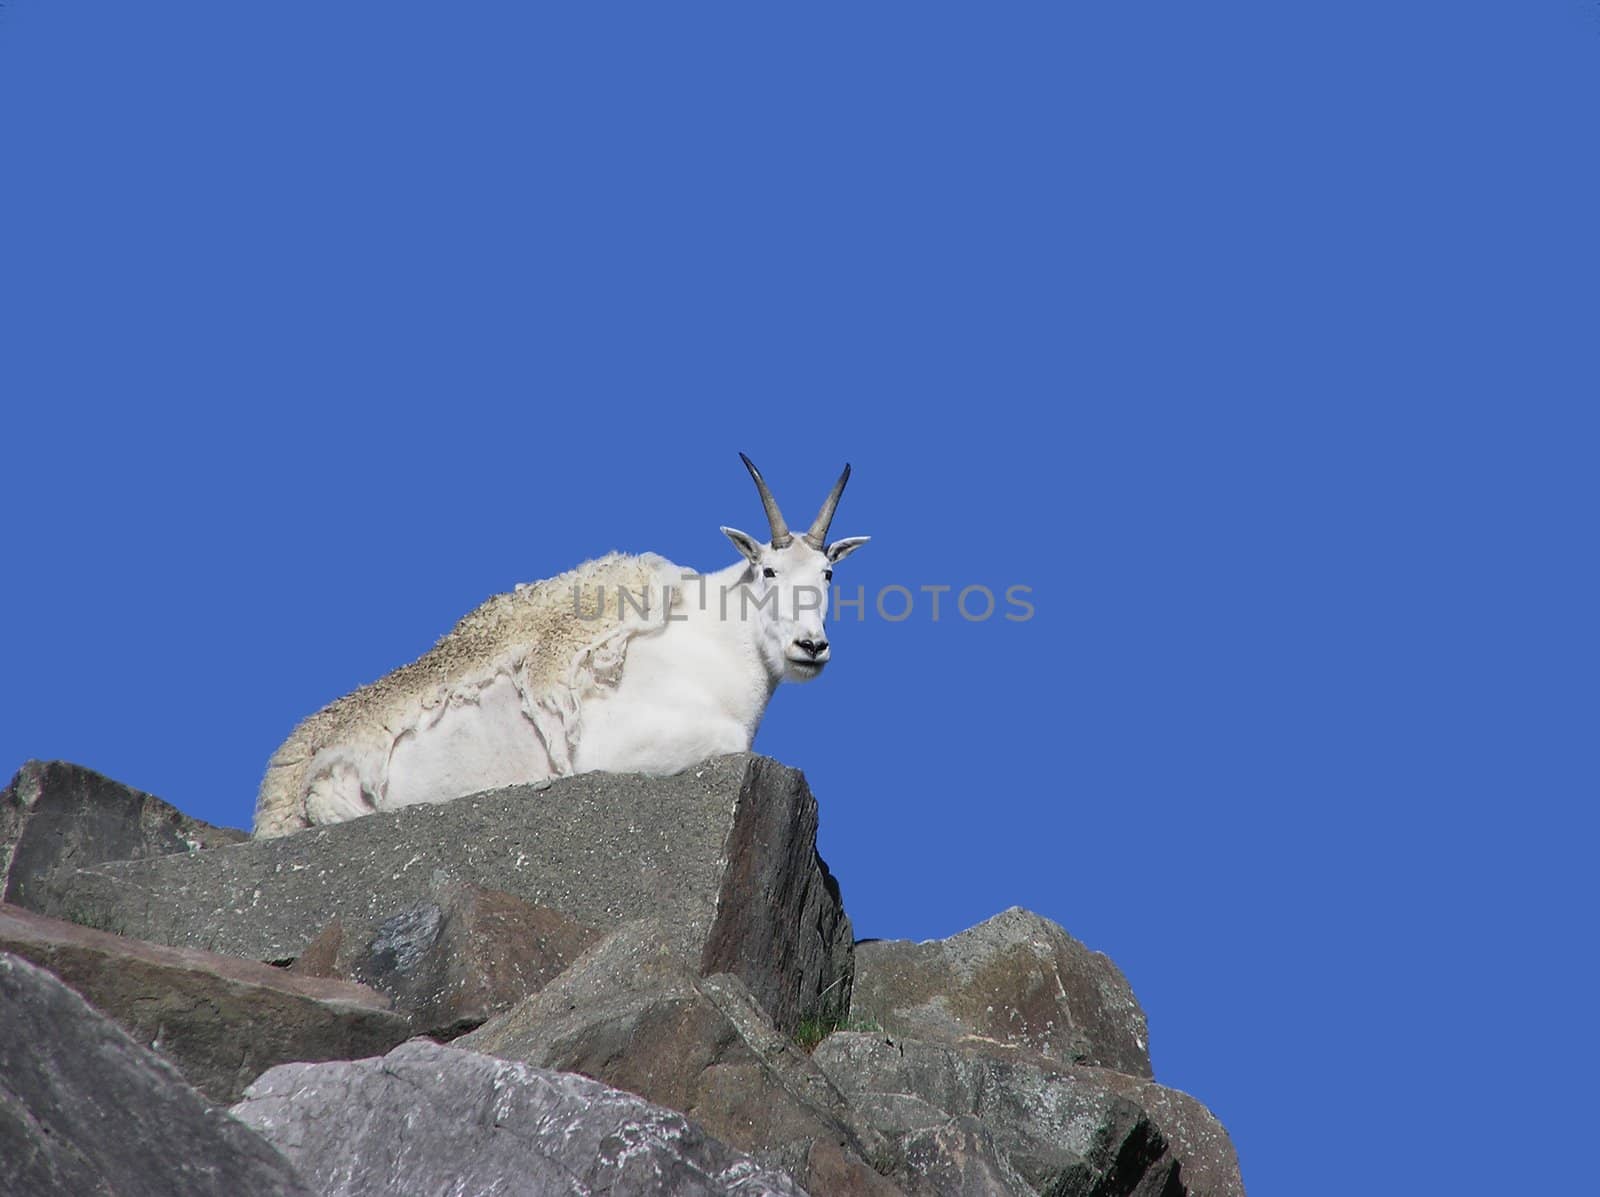 Mountain goat lying down on top of a rocky mountain against a bright blue sky looking down at camera   